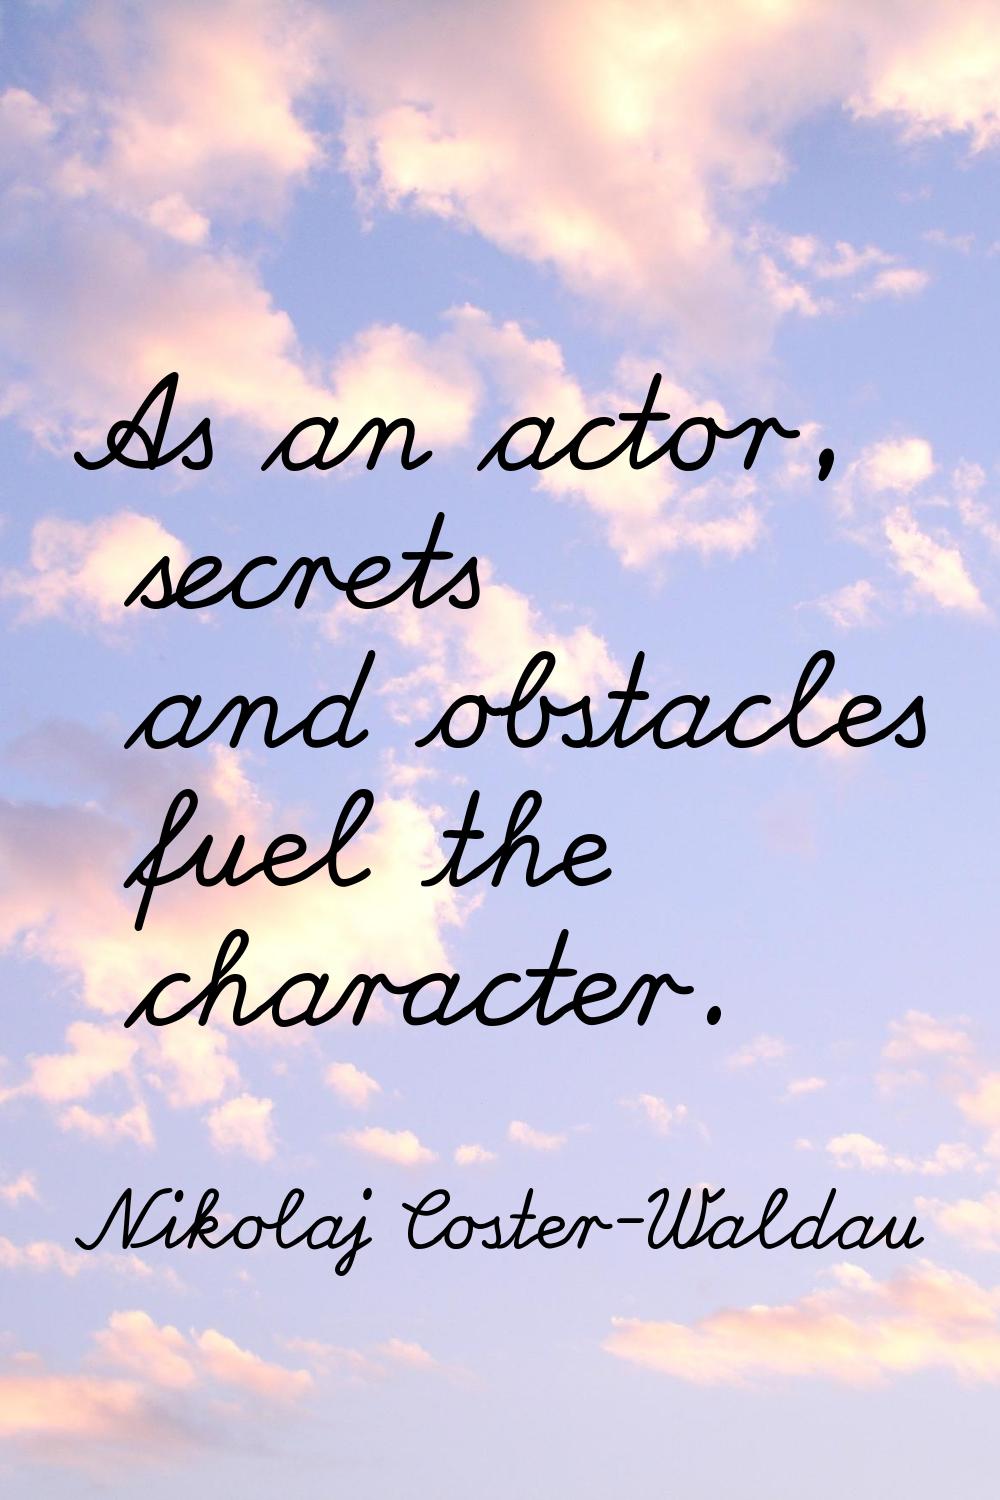 As an actor, secrets and obstacles fuel the character.